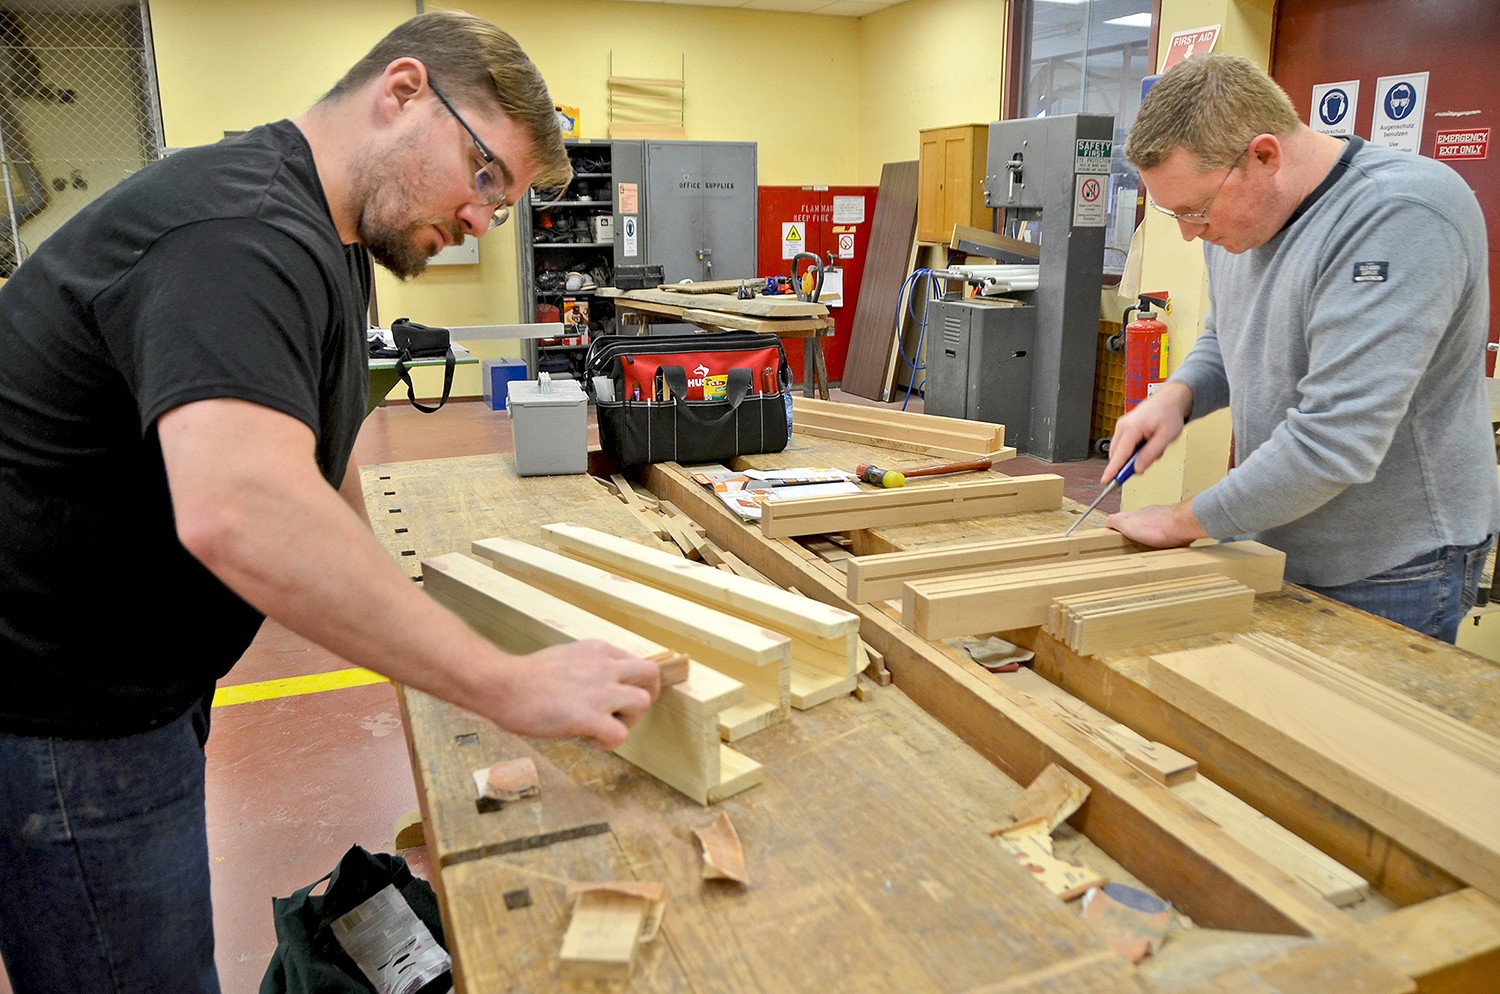 MWR's Wood Shop offers hands-on help, expertise and custom work | Article |  The United States Army